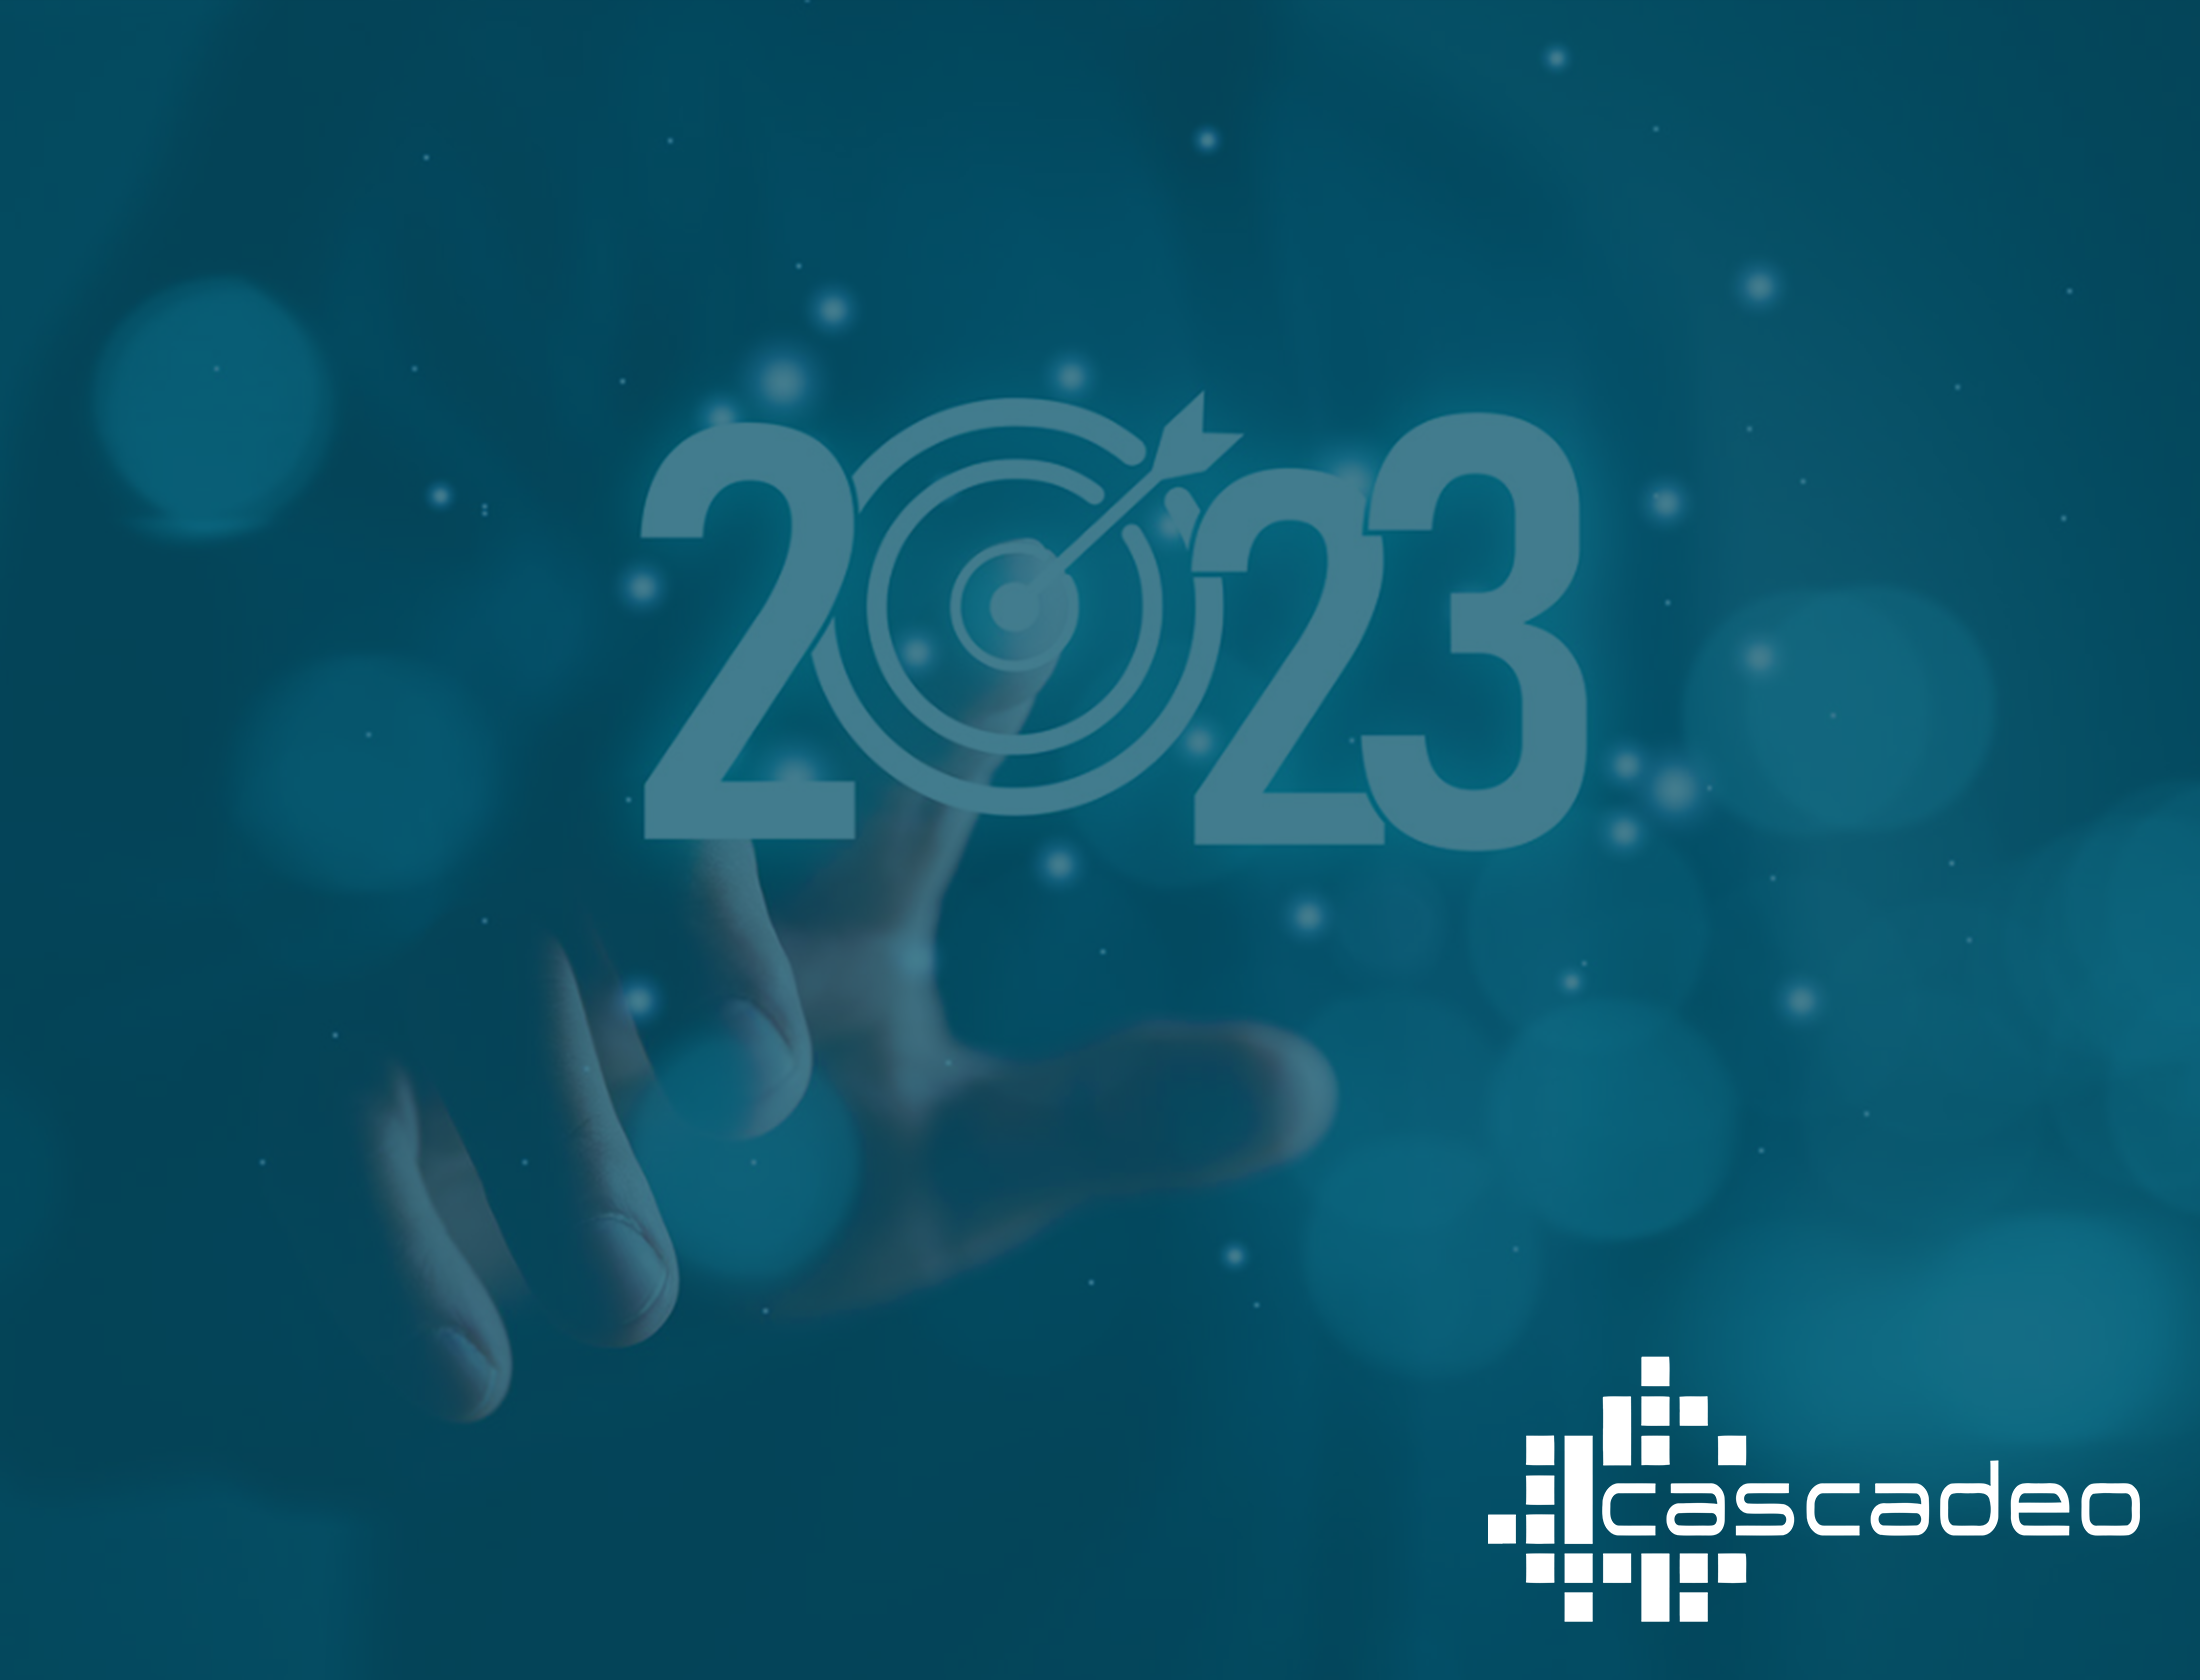 A hand reaches to touch a button with "2023" in the foreground with the Cascadeo logo in the lower right corner.